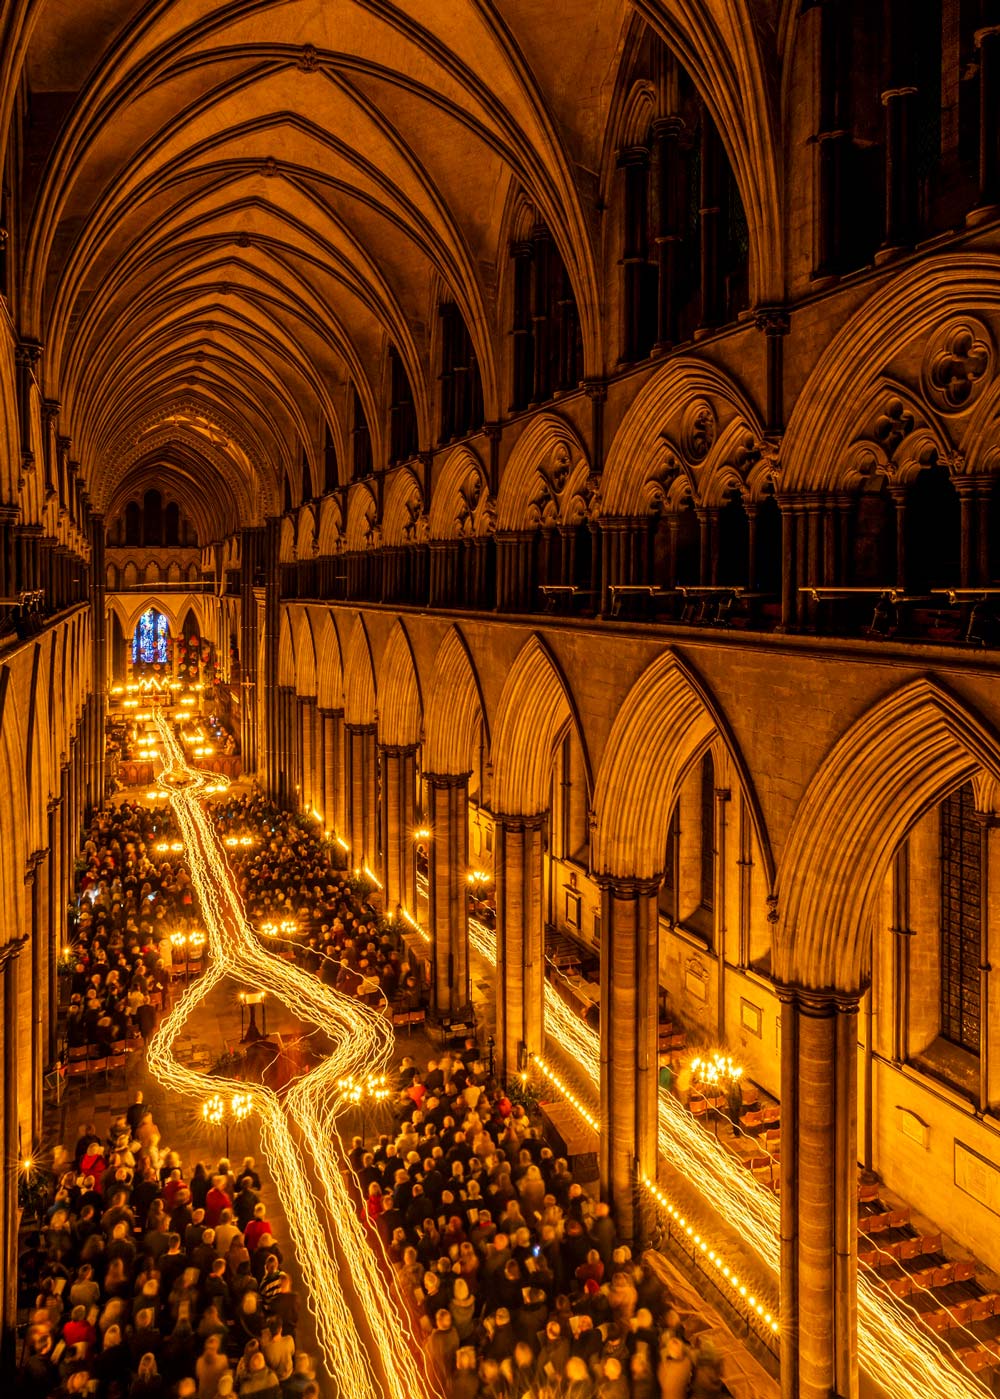 The final procession from the High Altar to the West End during the Darkness to Light Service. Credit: Max Willcock